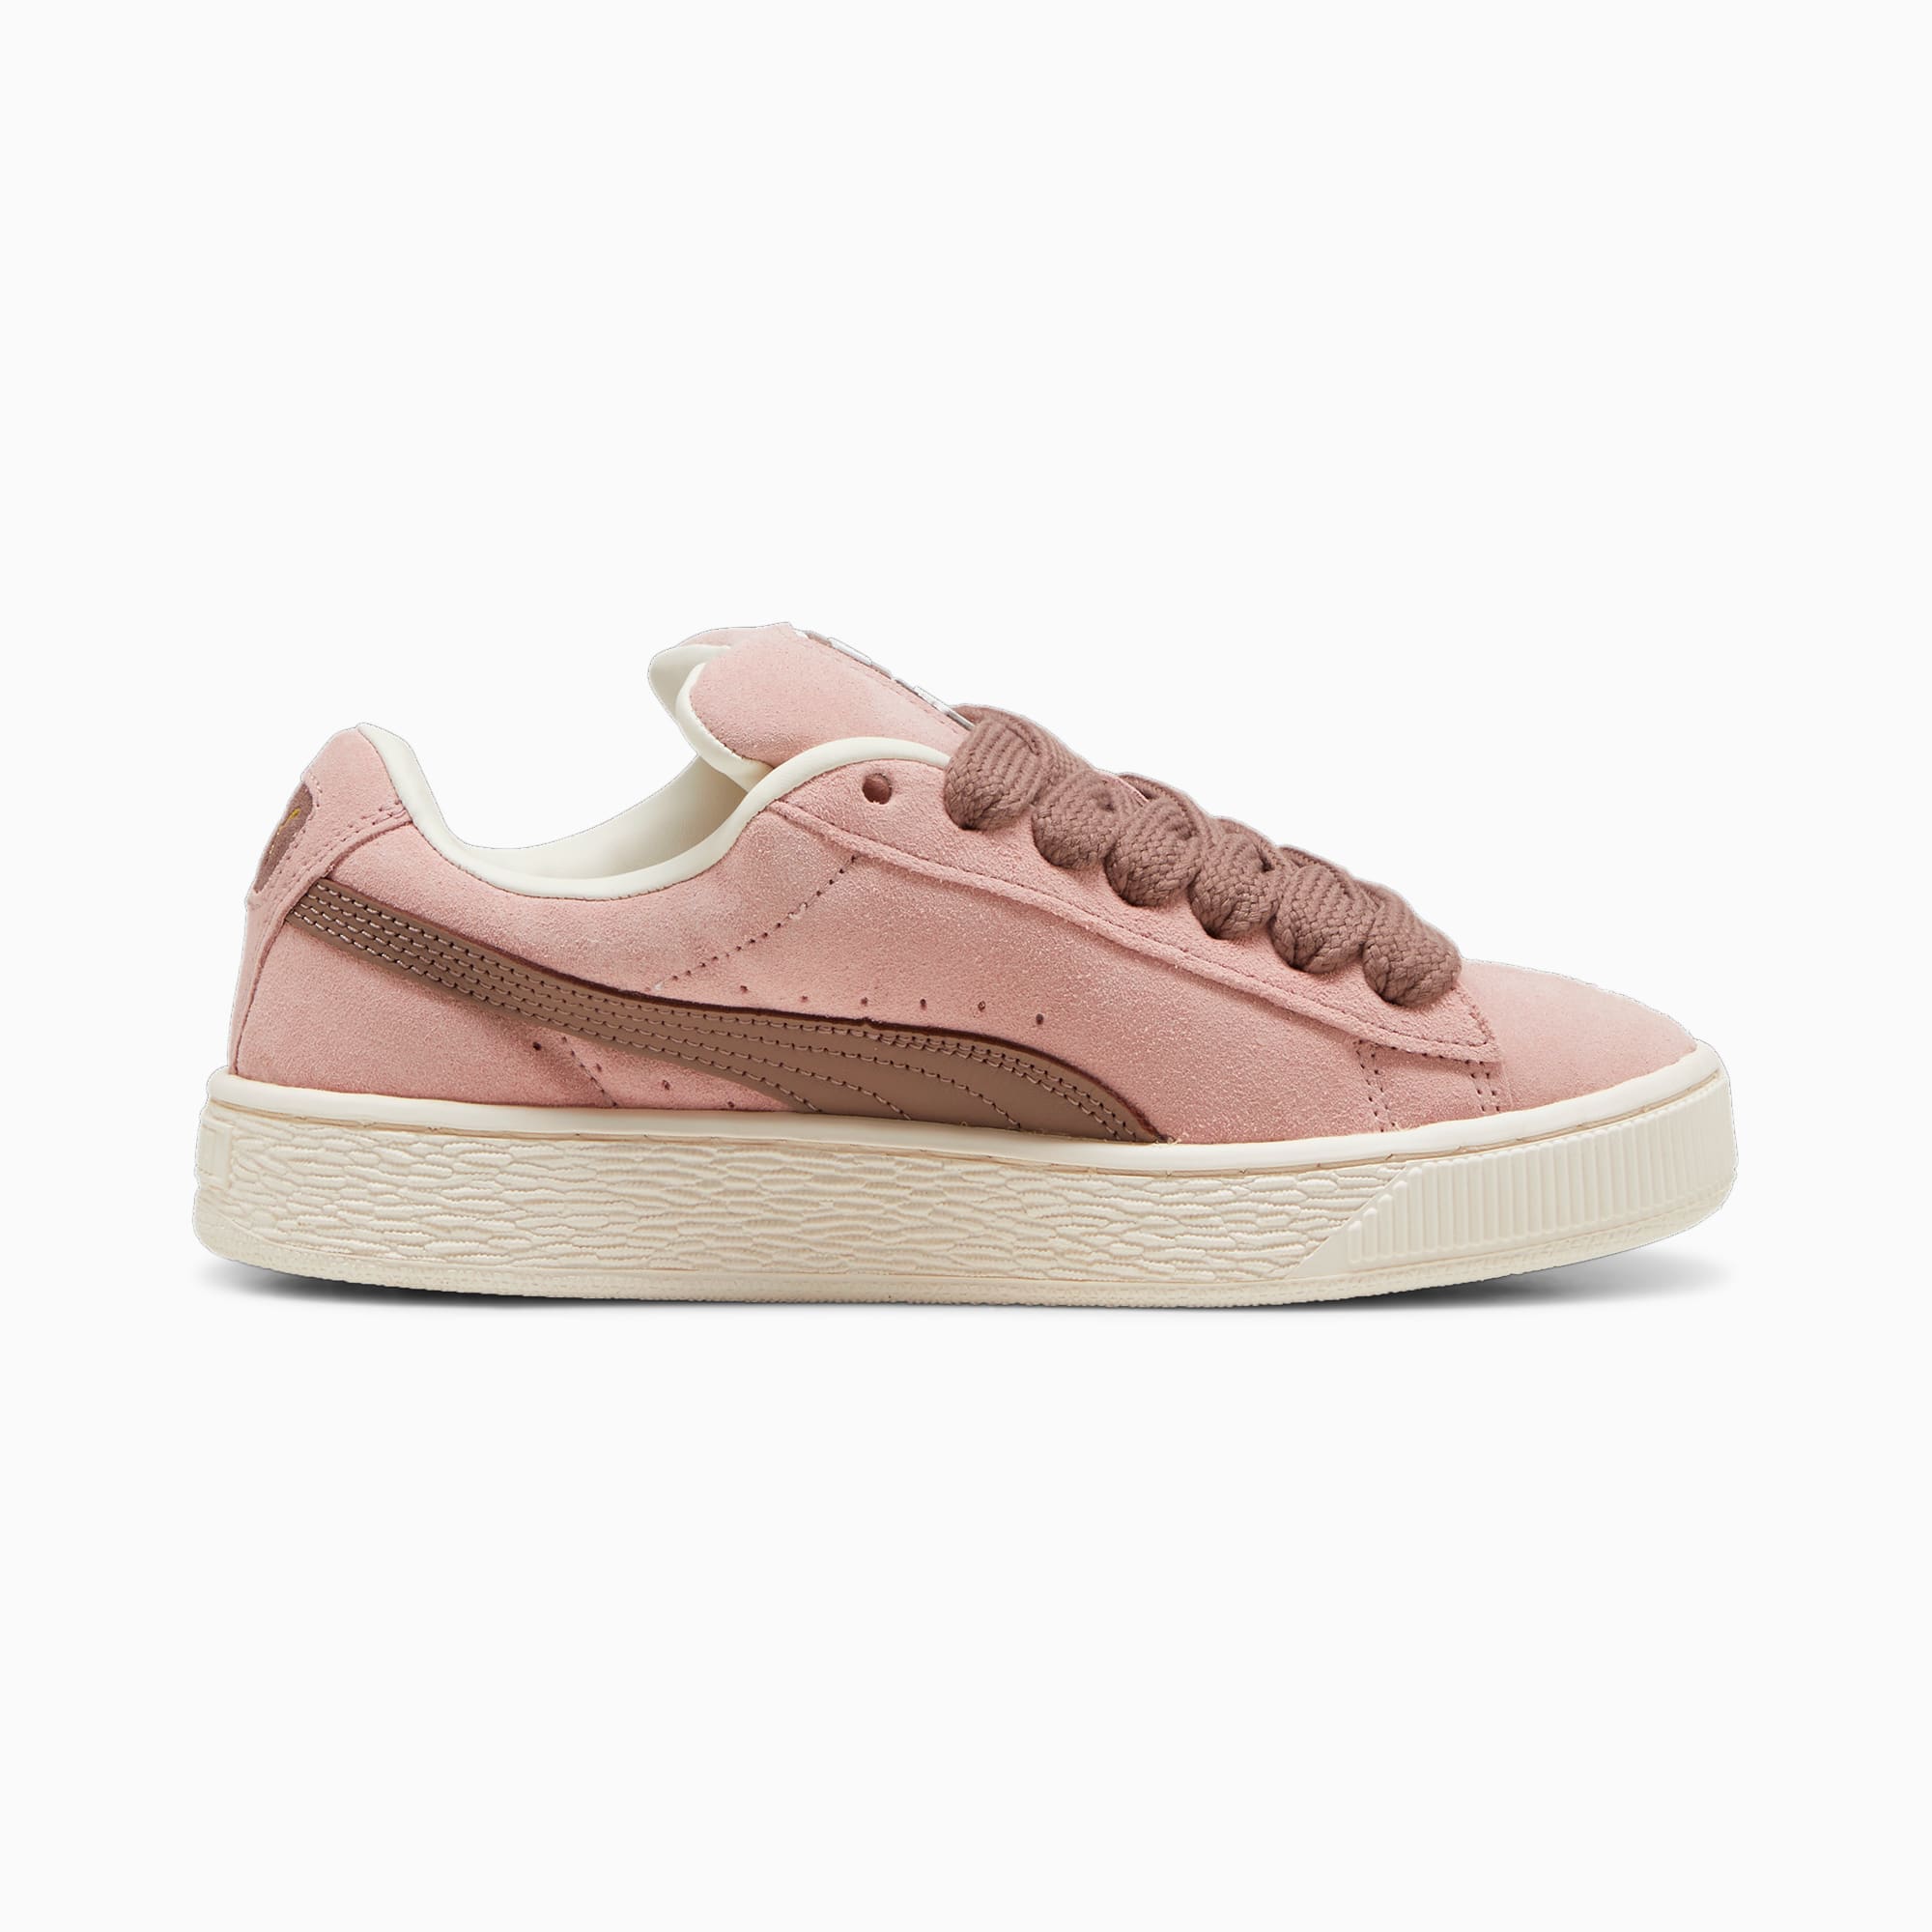 PUMA Suede Xl Sneakers Women, Future Pink/Warm White, Size 35,5, Shoes